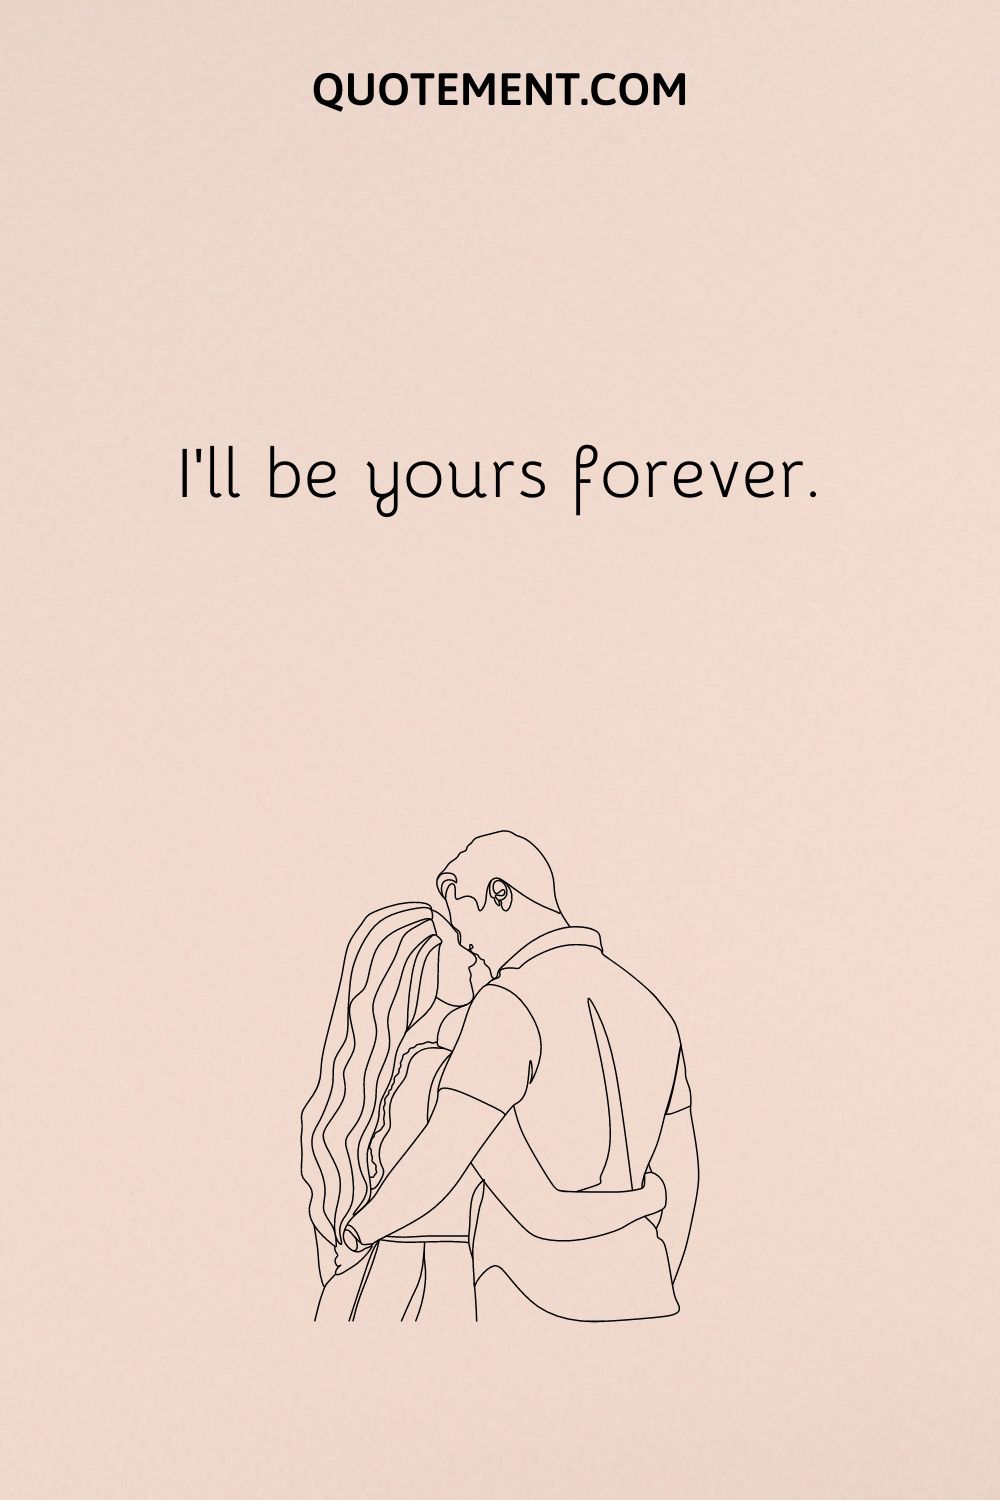 I’ll be yours forever.